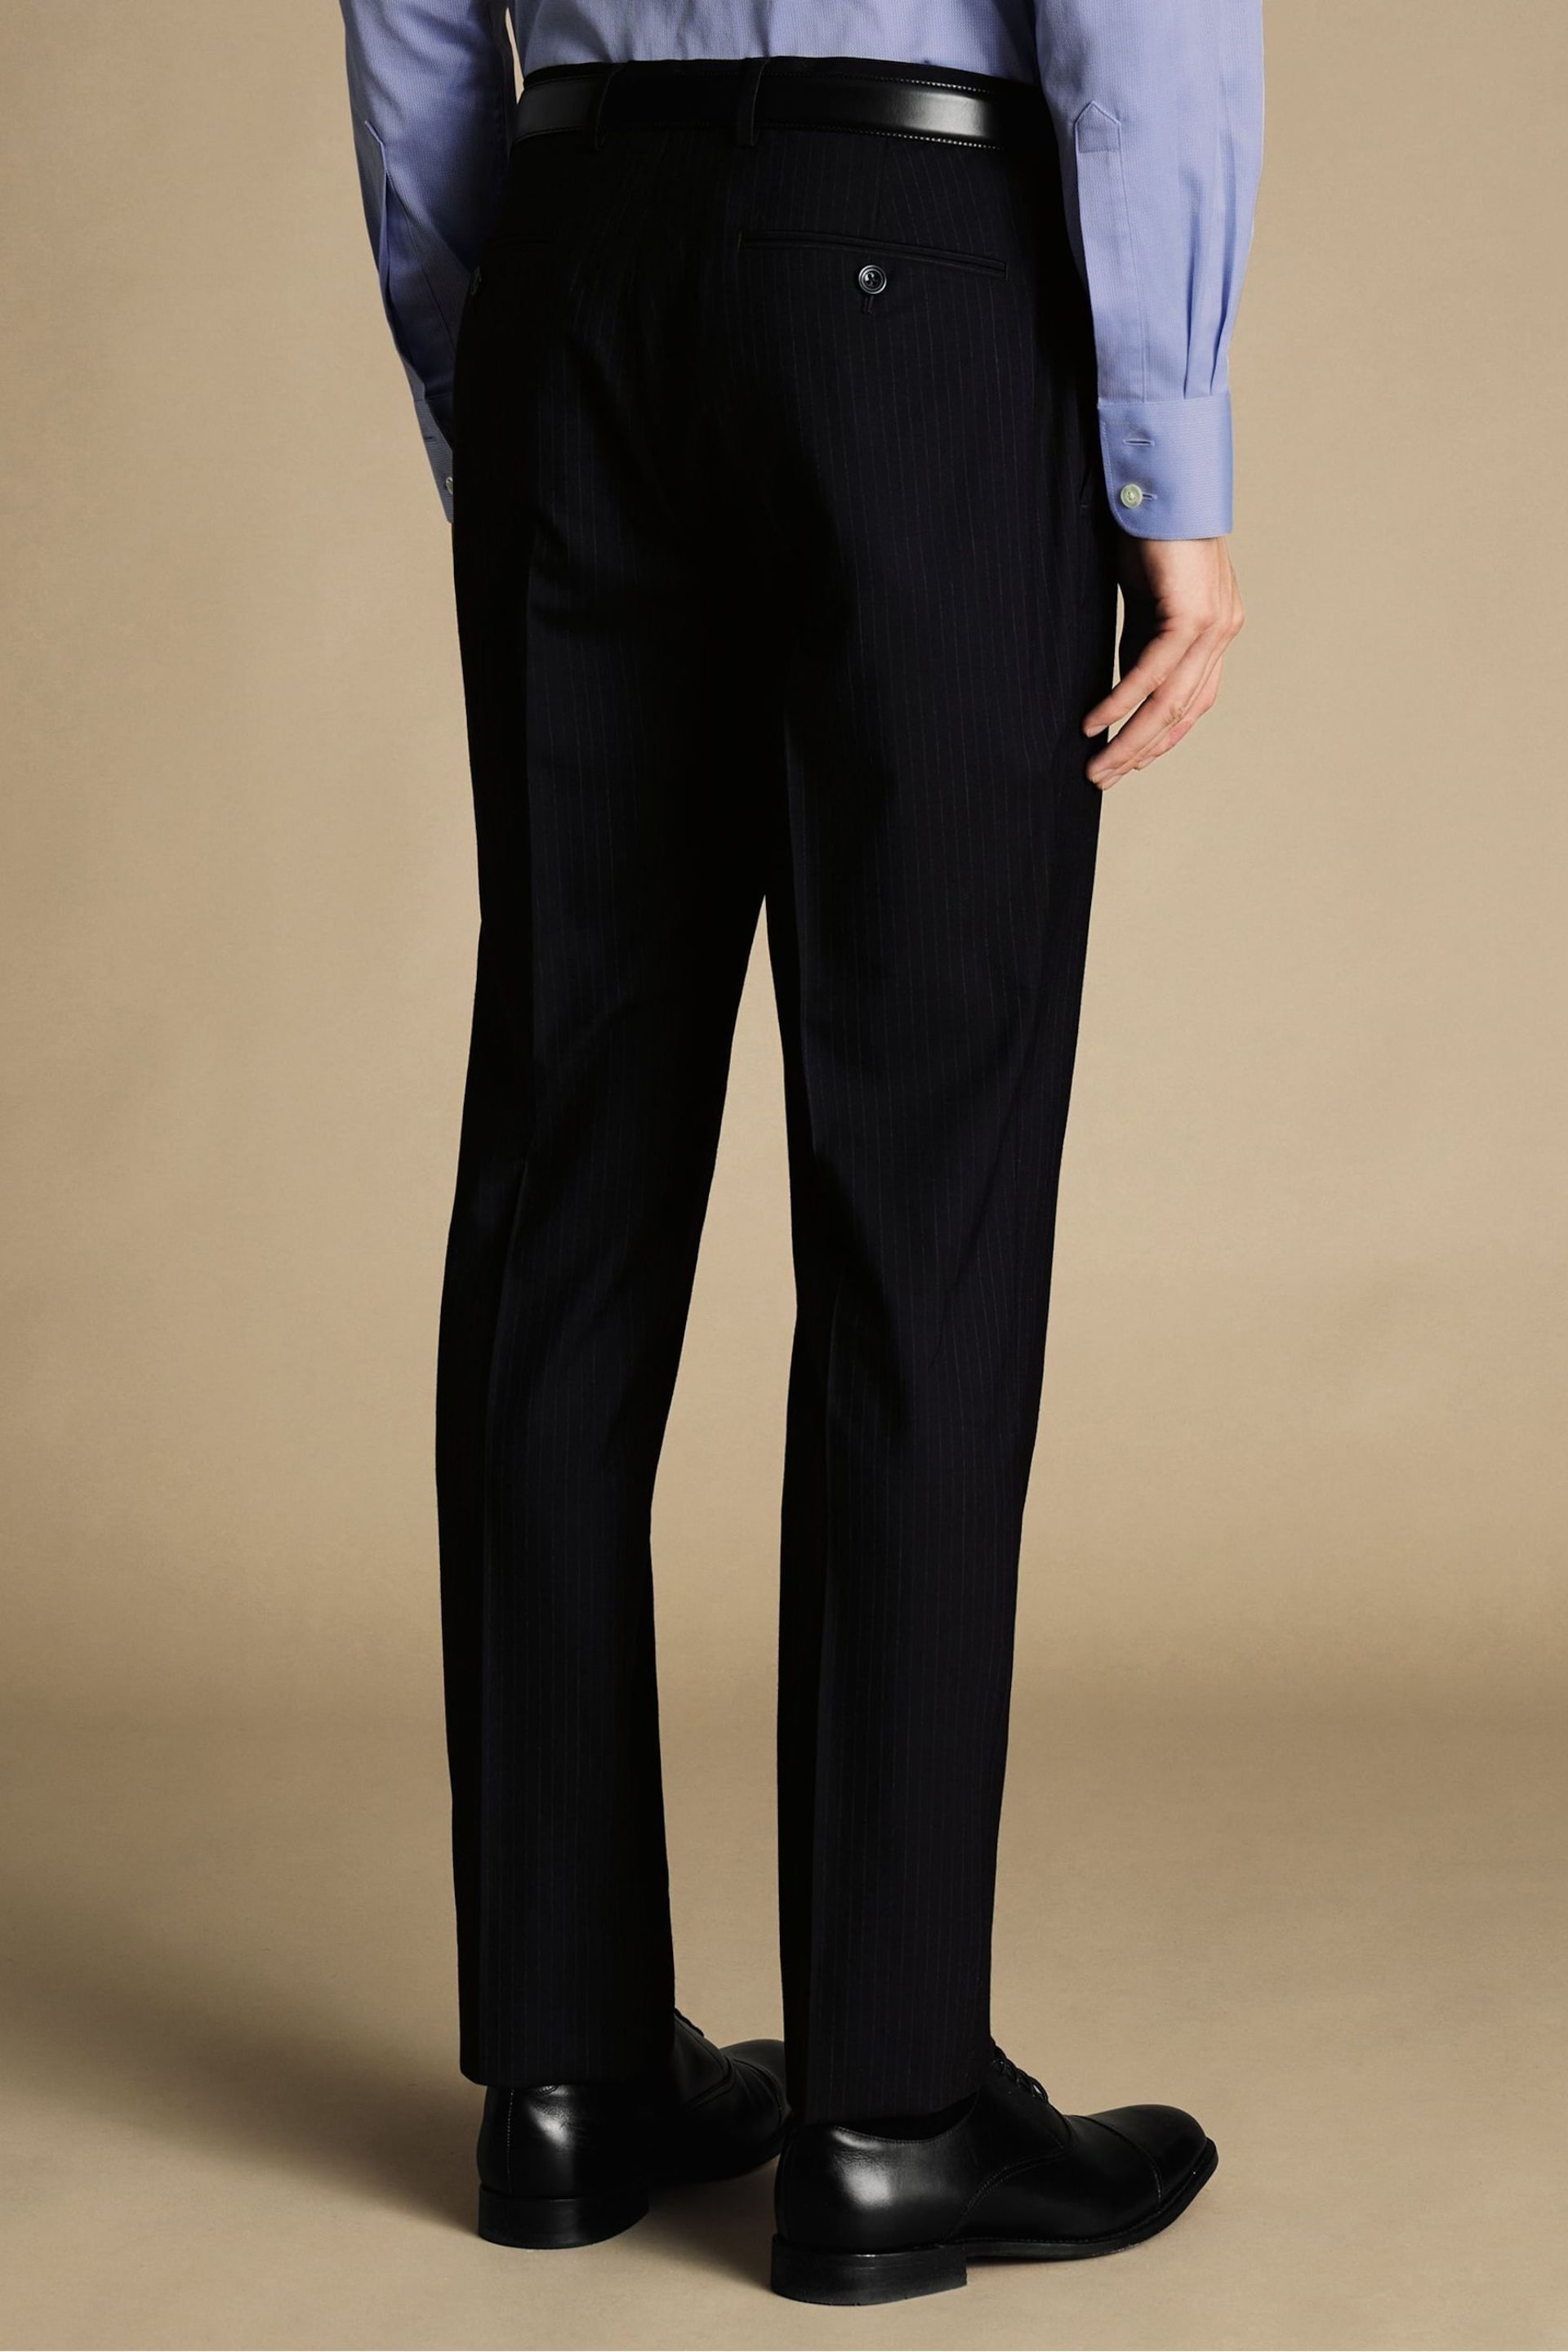 Charles Tyrwhitt Blue Slim-Fit Stripe Ultimate Performance Suit Trousers - Image 3 of 4